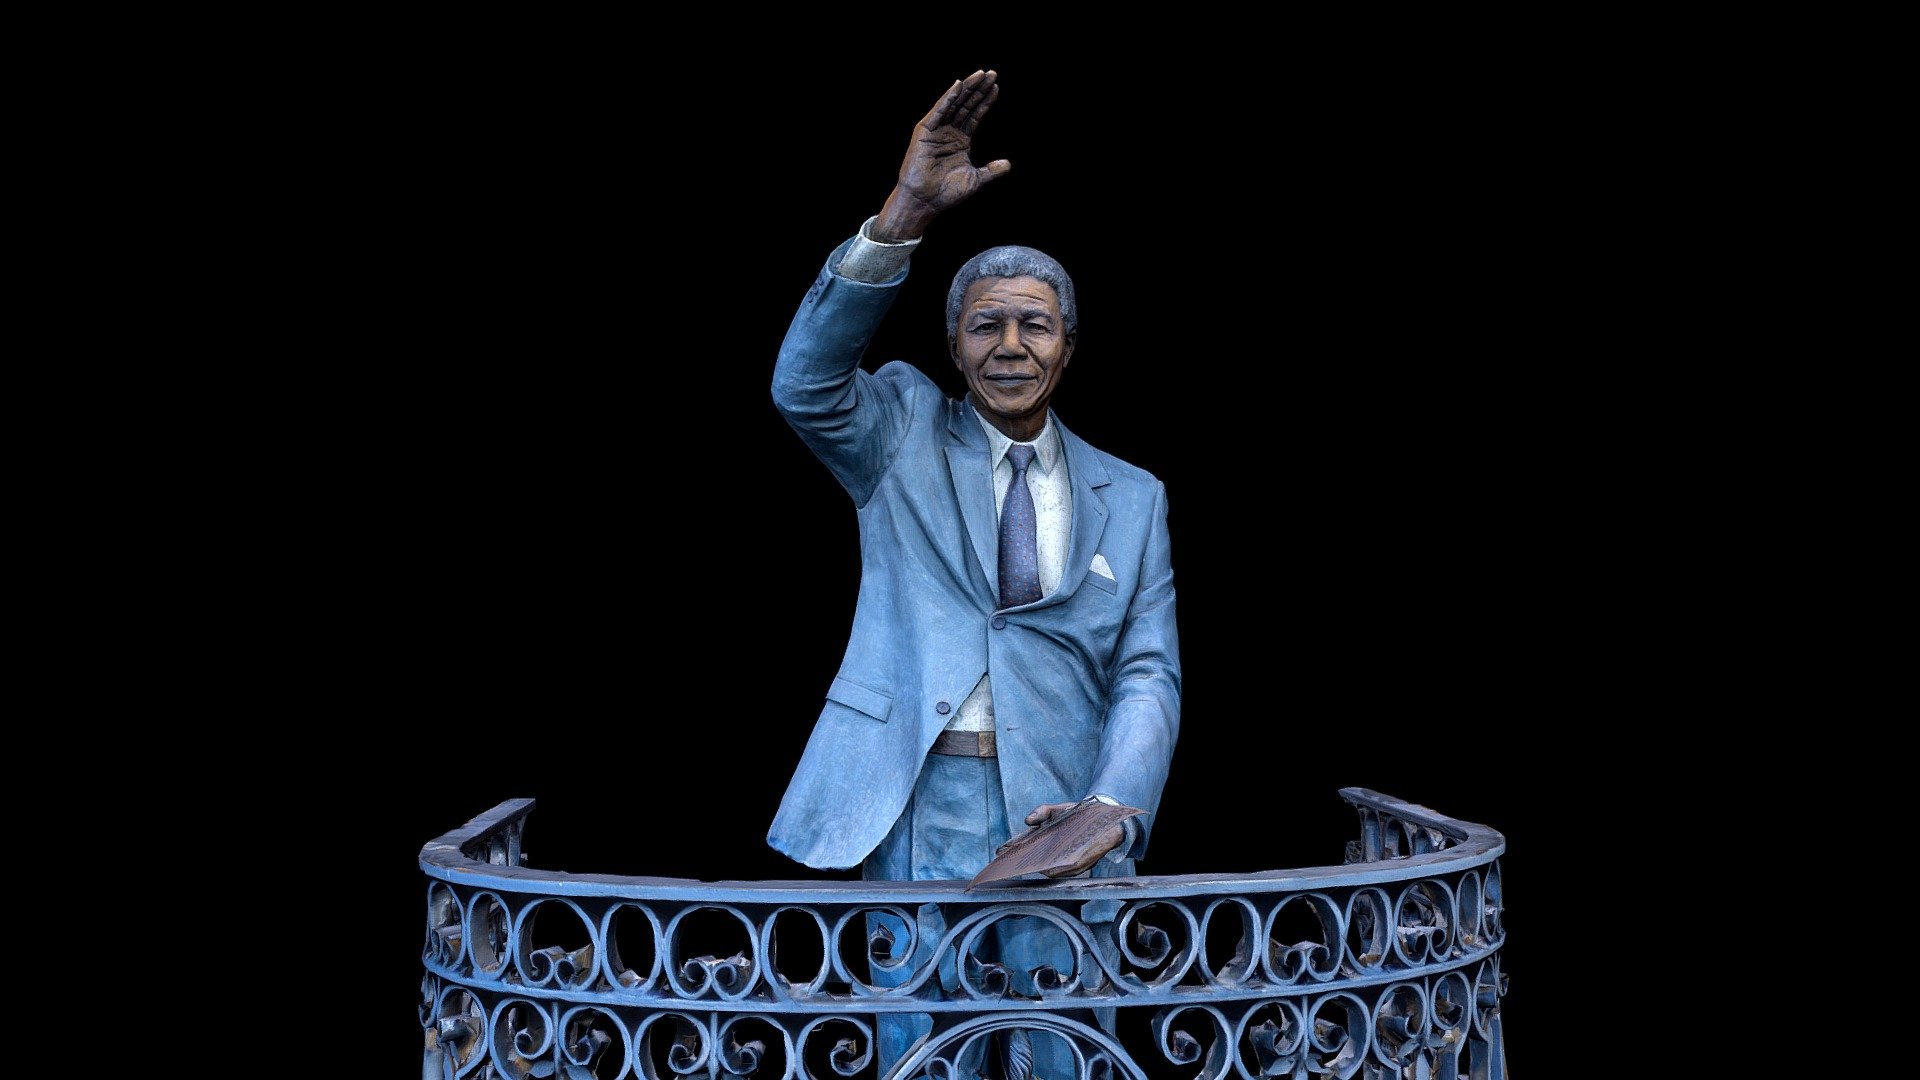 Nelson Mandela statue at the Cape Town City Hall installed in 2018
8 laser scans Z+F 5010X
180 images Nikon D7200 28mm
Reality Capture
Audio from: https://youtu.be/-Qj4e_q7_z4 - Nelson Mandela - 3D model by Zamani Project (@zamaniproject) 3d model